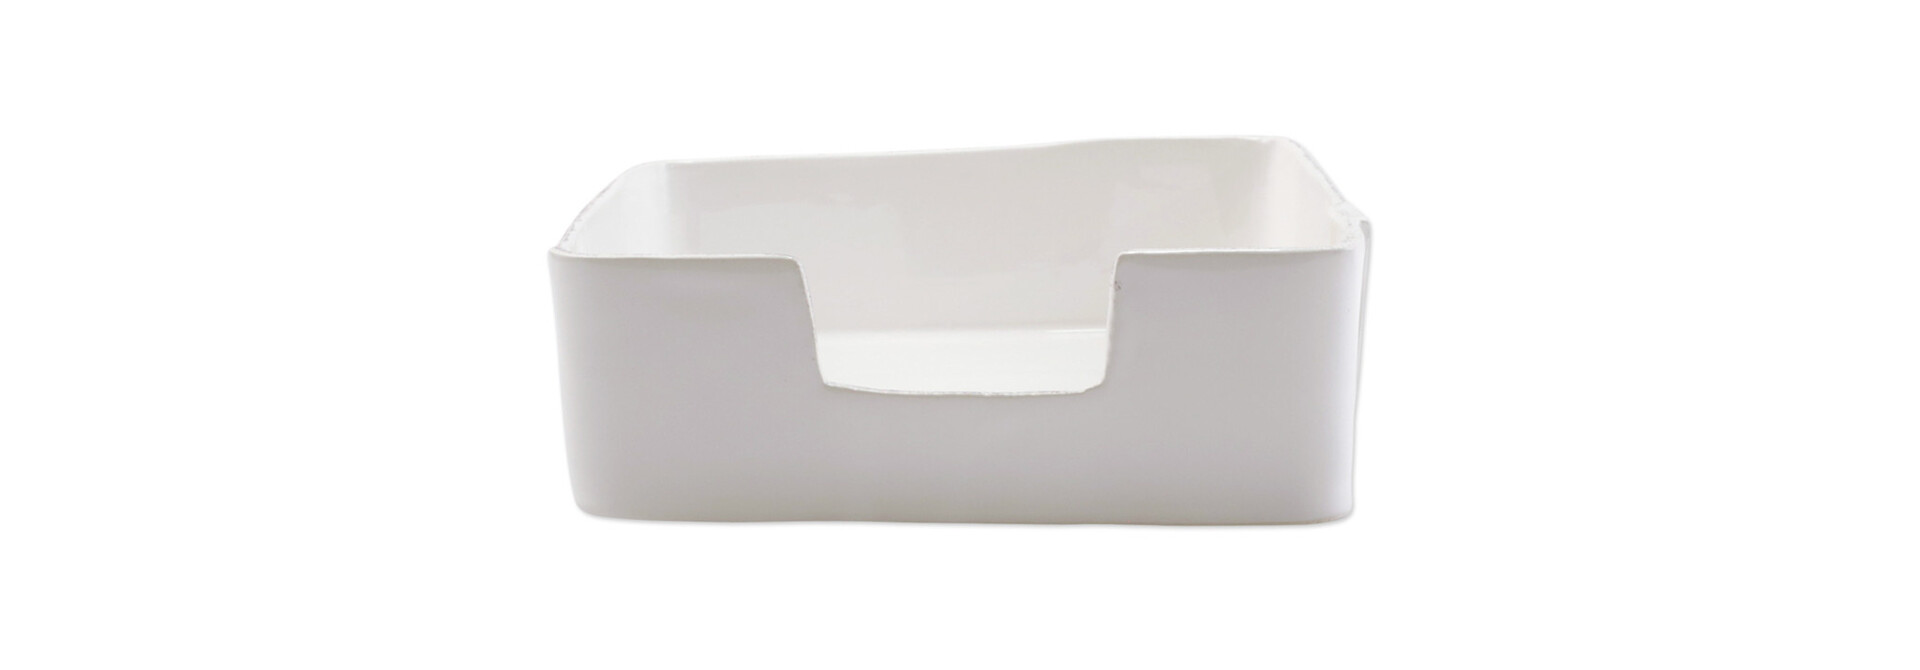 Lastra | The Dinner Napkin  Holder Collection, White -  8.25 In ch x 8.25 Inch x 3.25 Inch